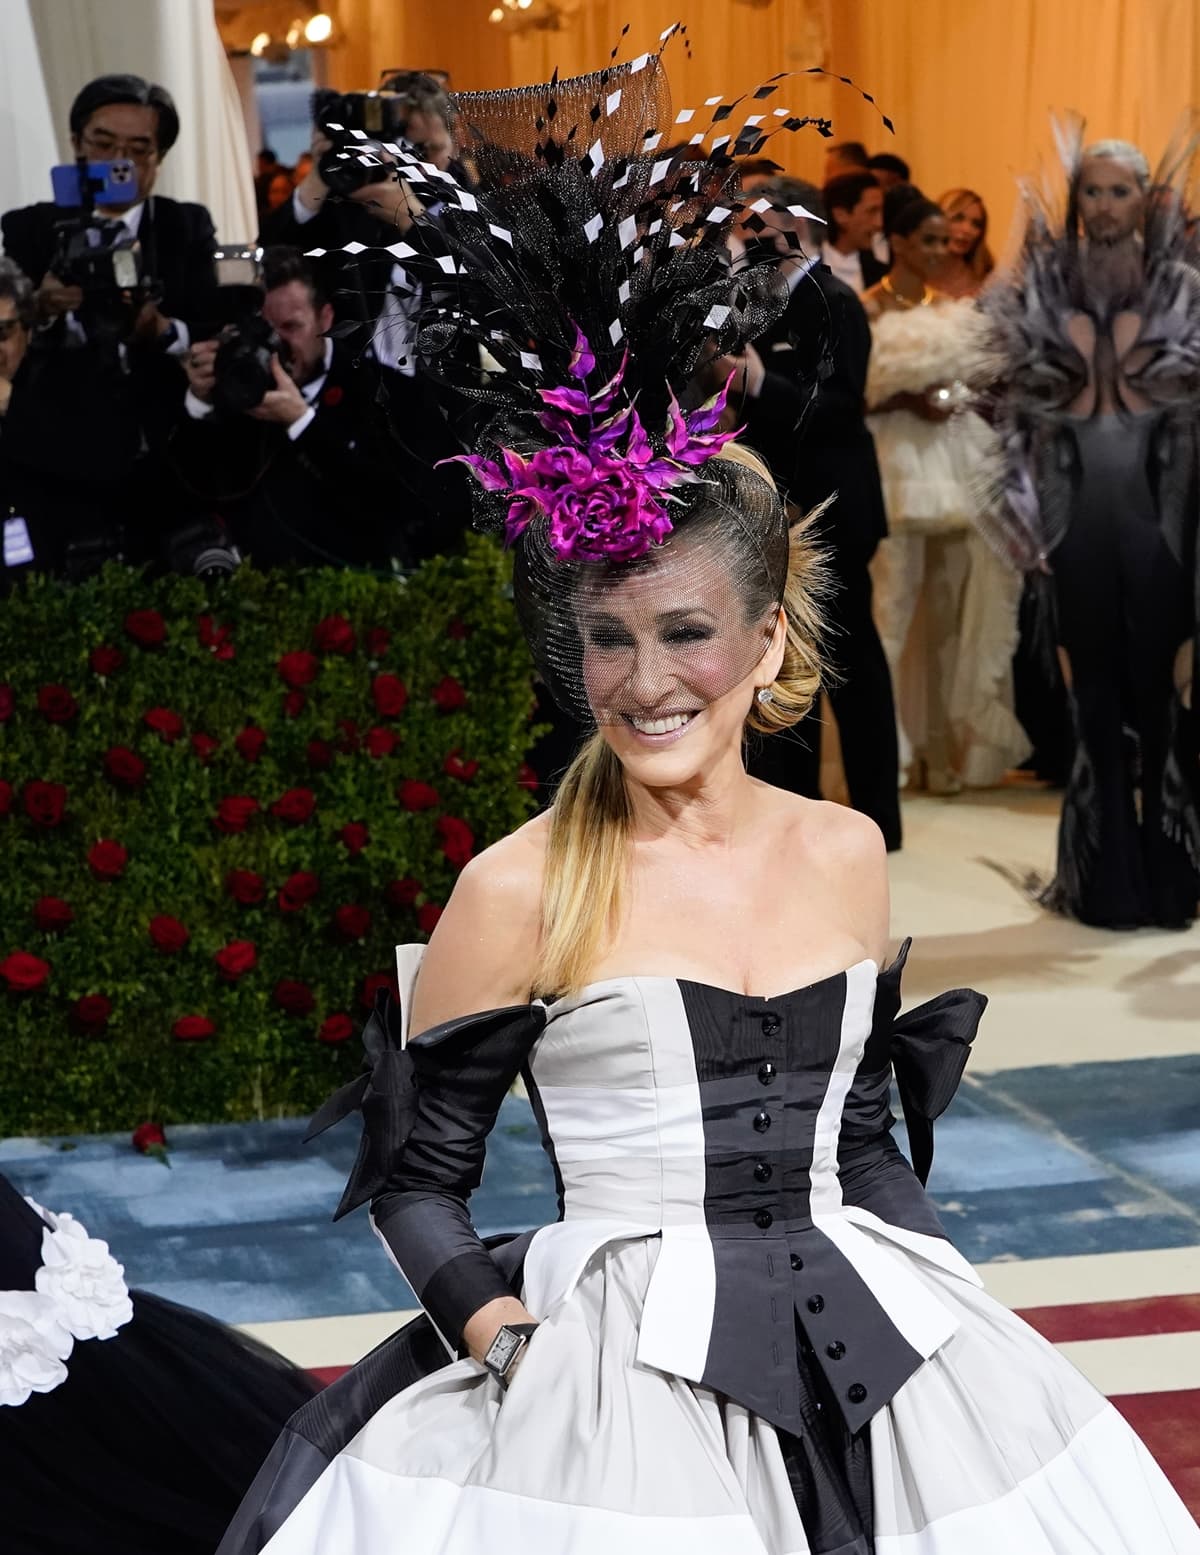 Sarah Jessica Parker completed her look with a colorful Philip Treacy hat and Fred Leighton jewelry